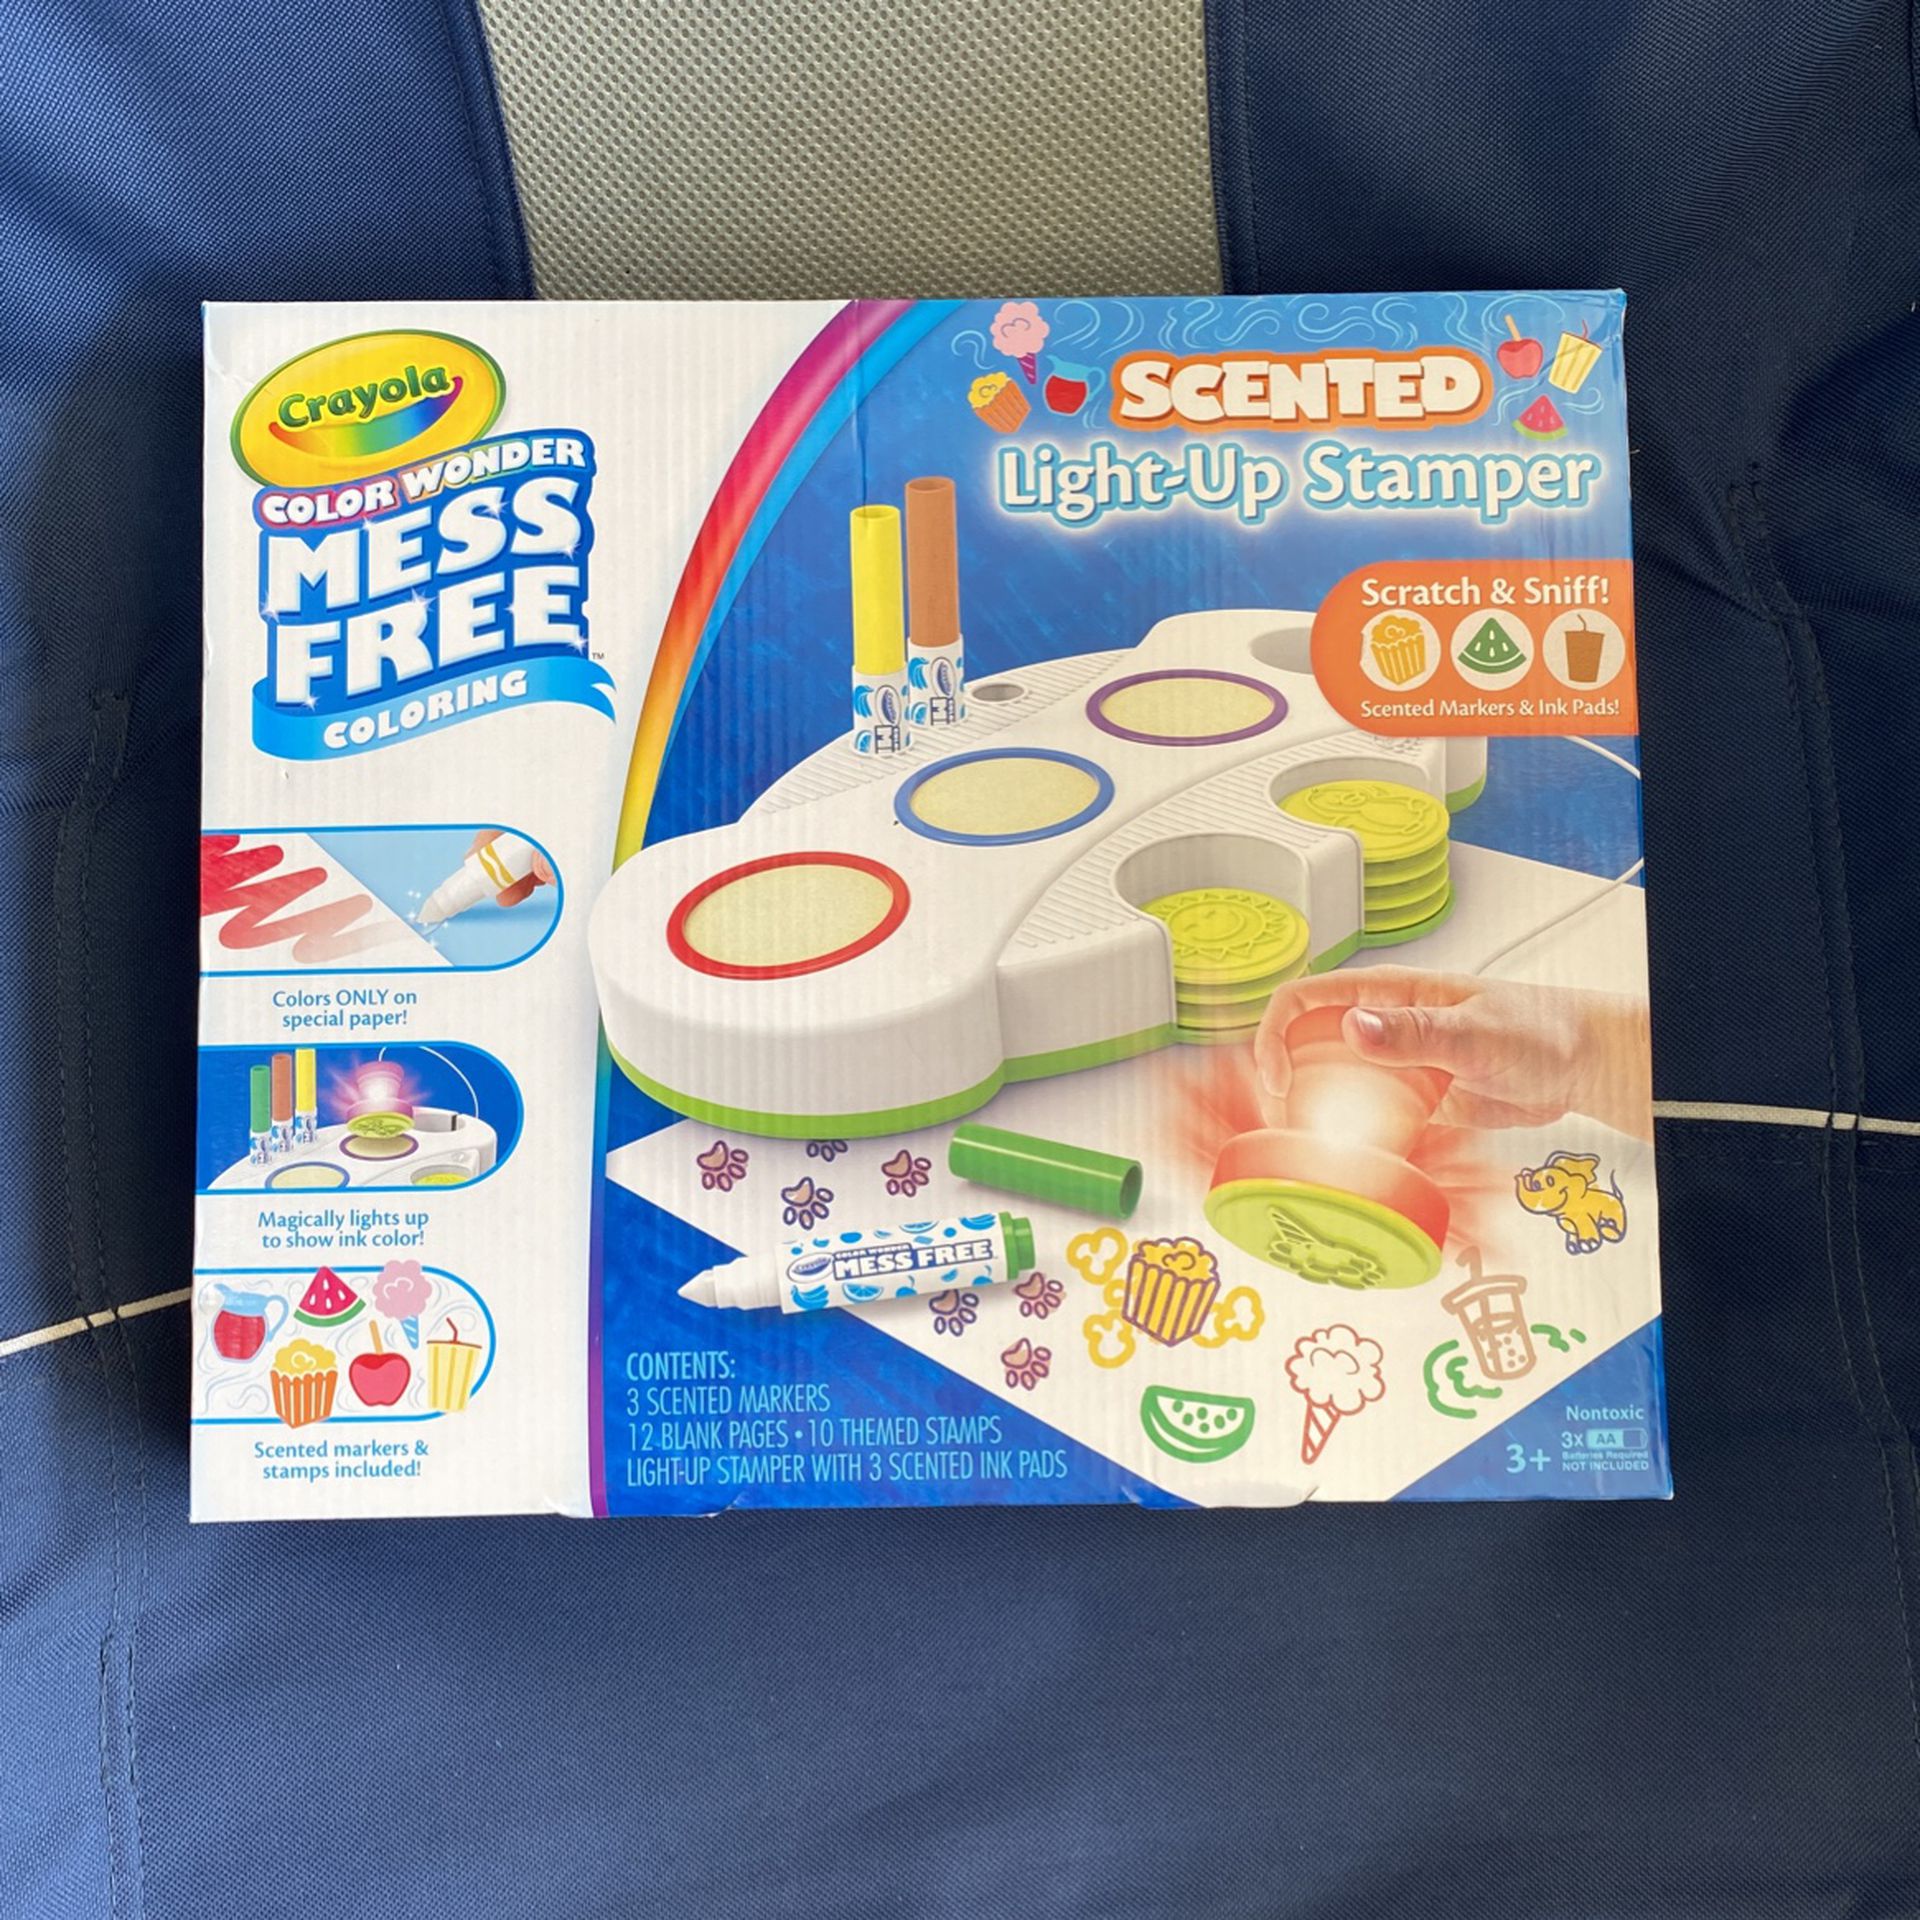 New Crayola Color Wonder Mess Free Scented Light Stamper for Sale in Houston, - OfferUp